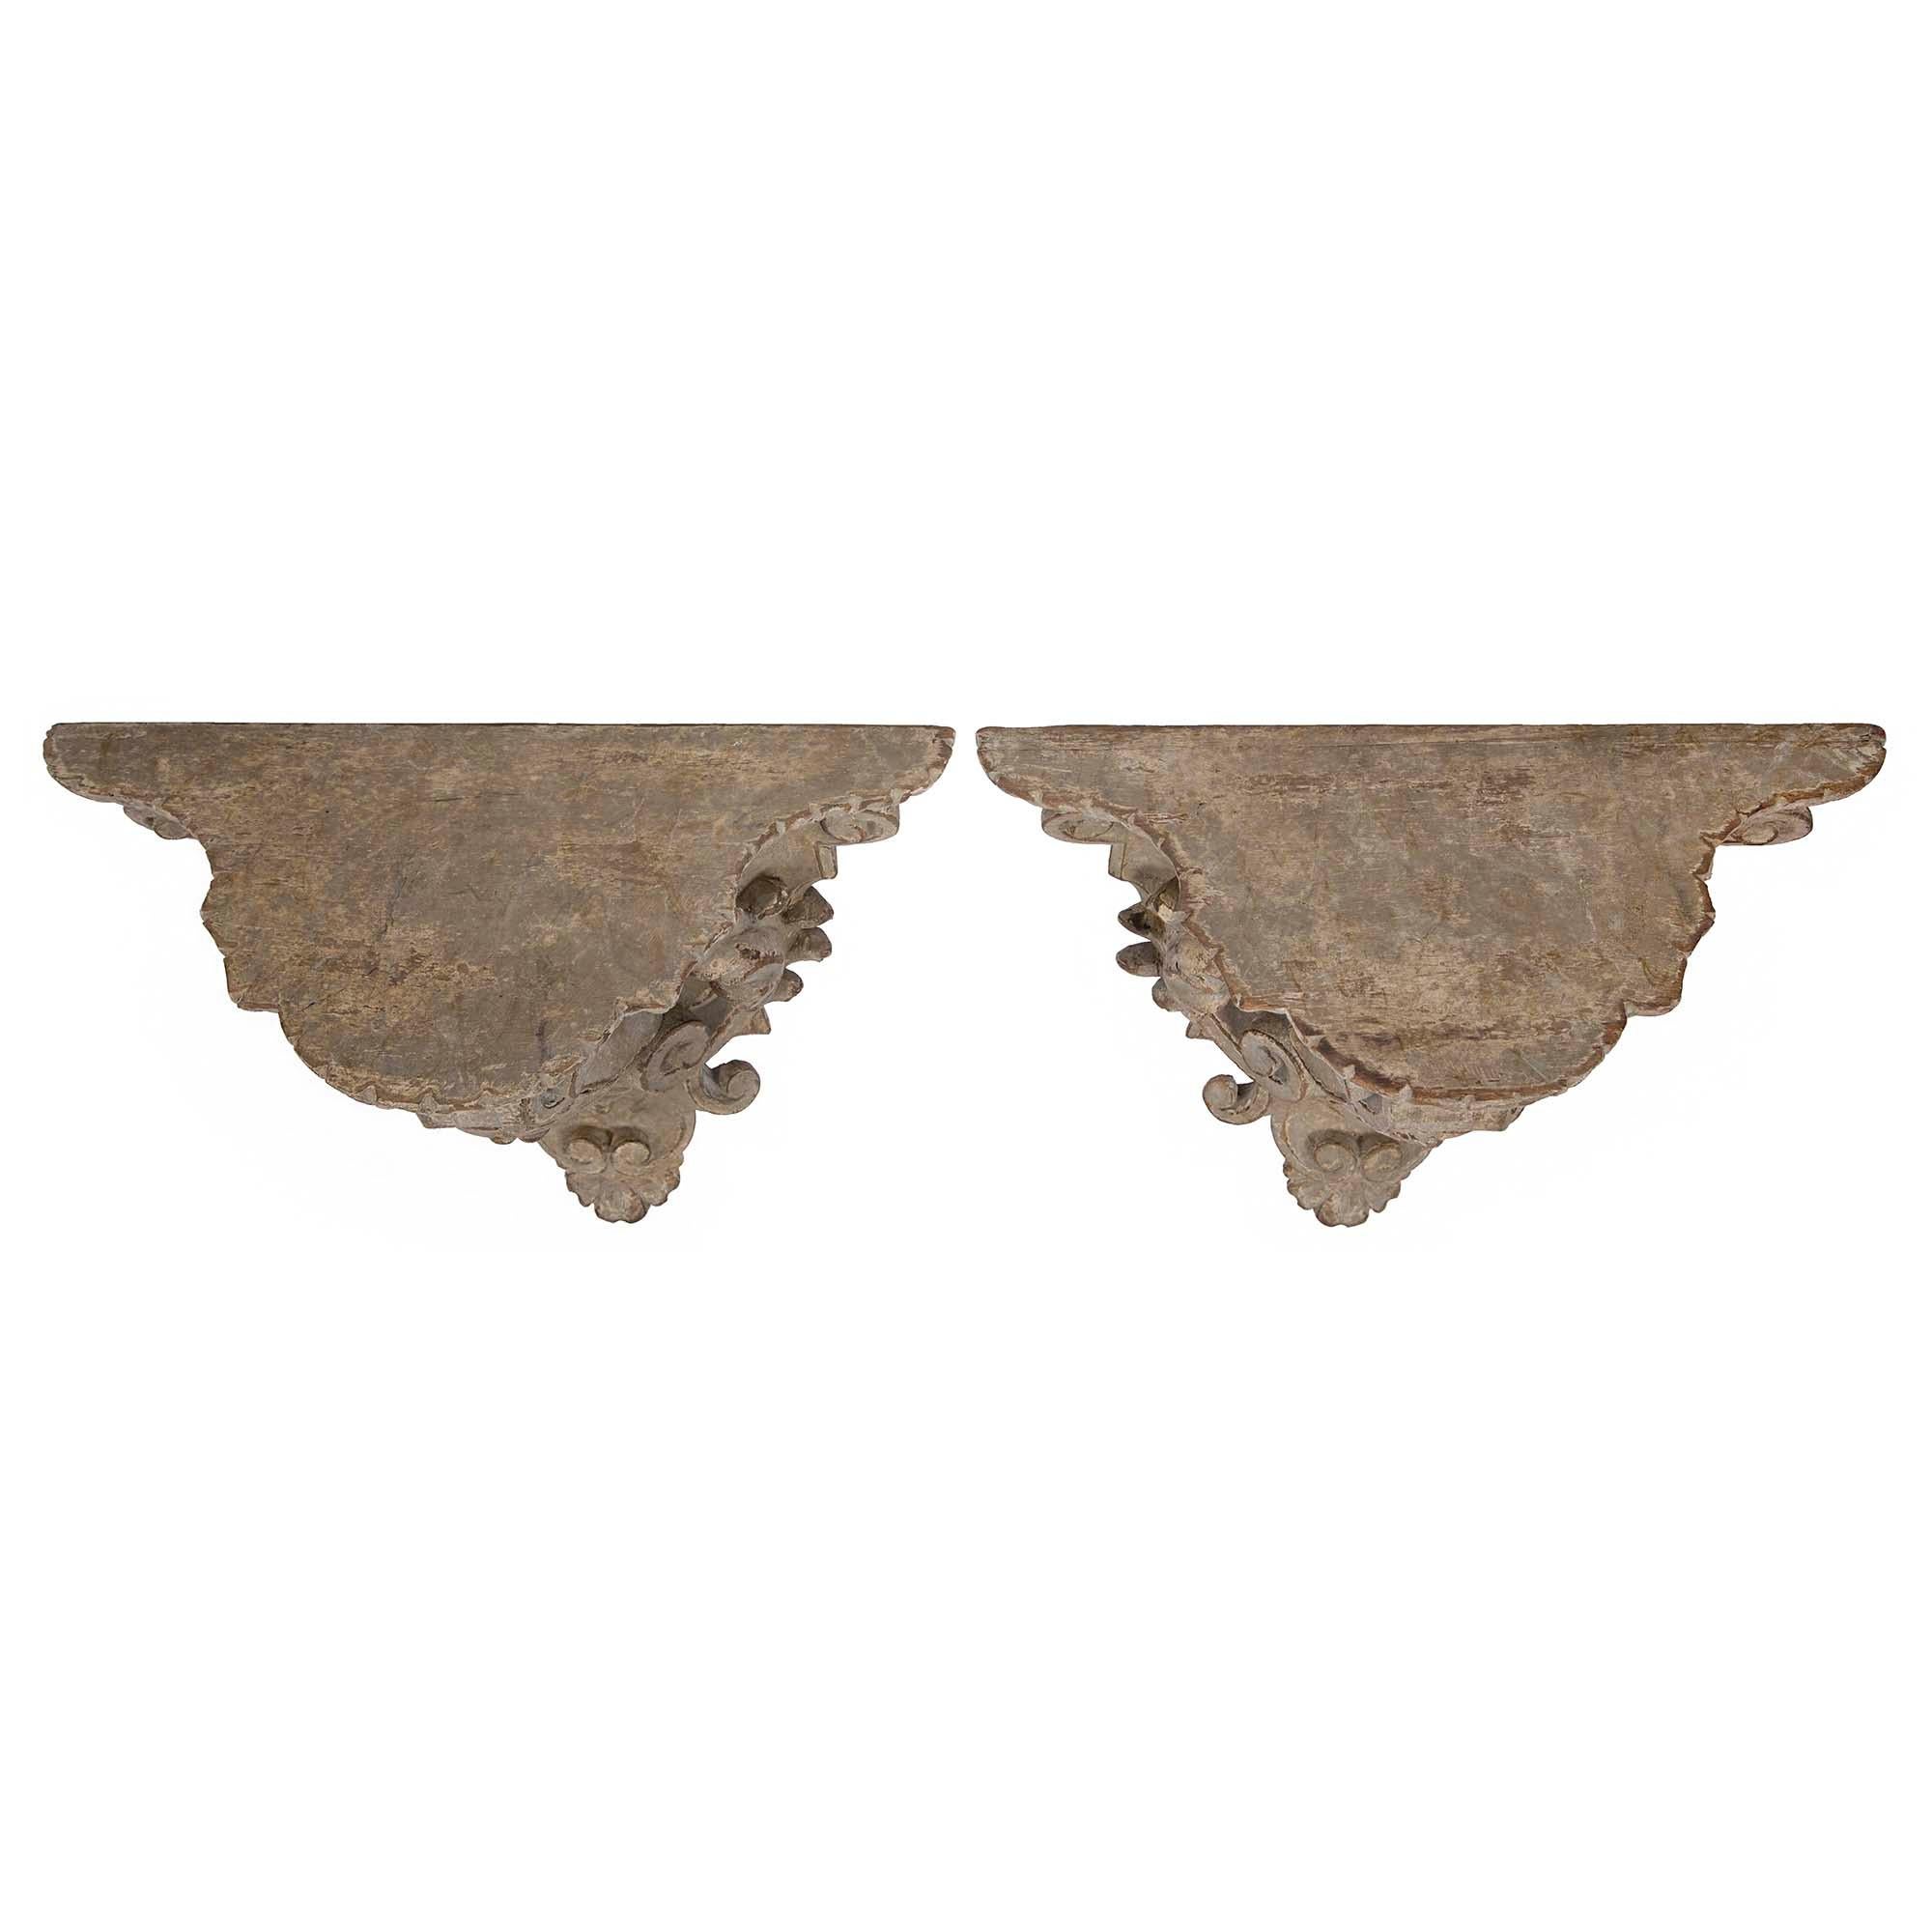 A pair of very handsome Italian early 19th century patinated Venetian wall brackets. Each wonderfully carved wall bracket has a scrolled foliate design centered by charming masks. With all original patina throughout and large contoured top